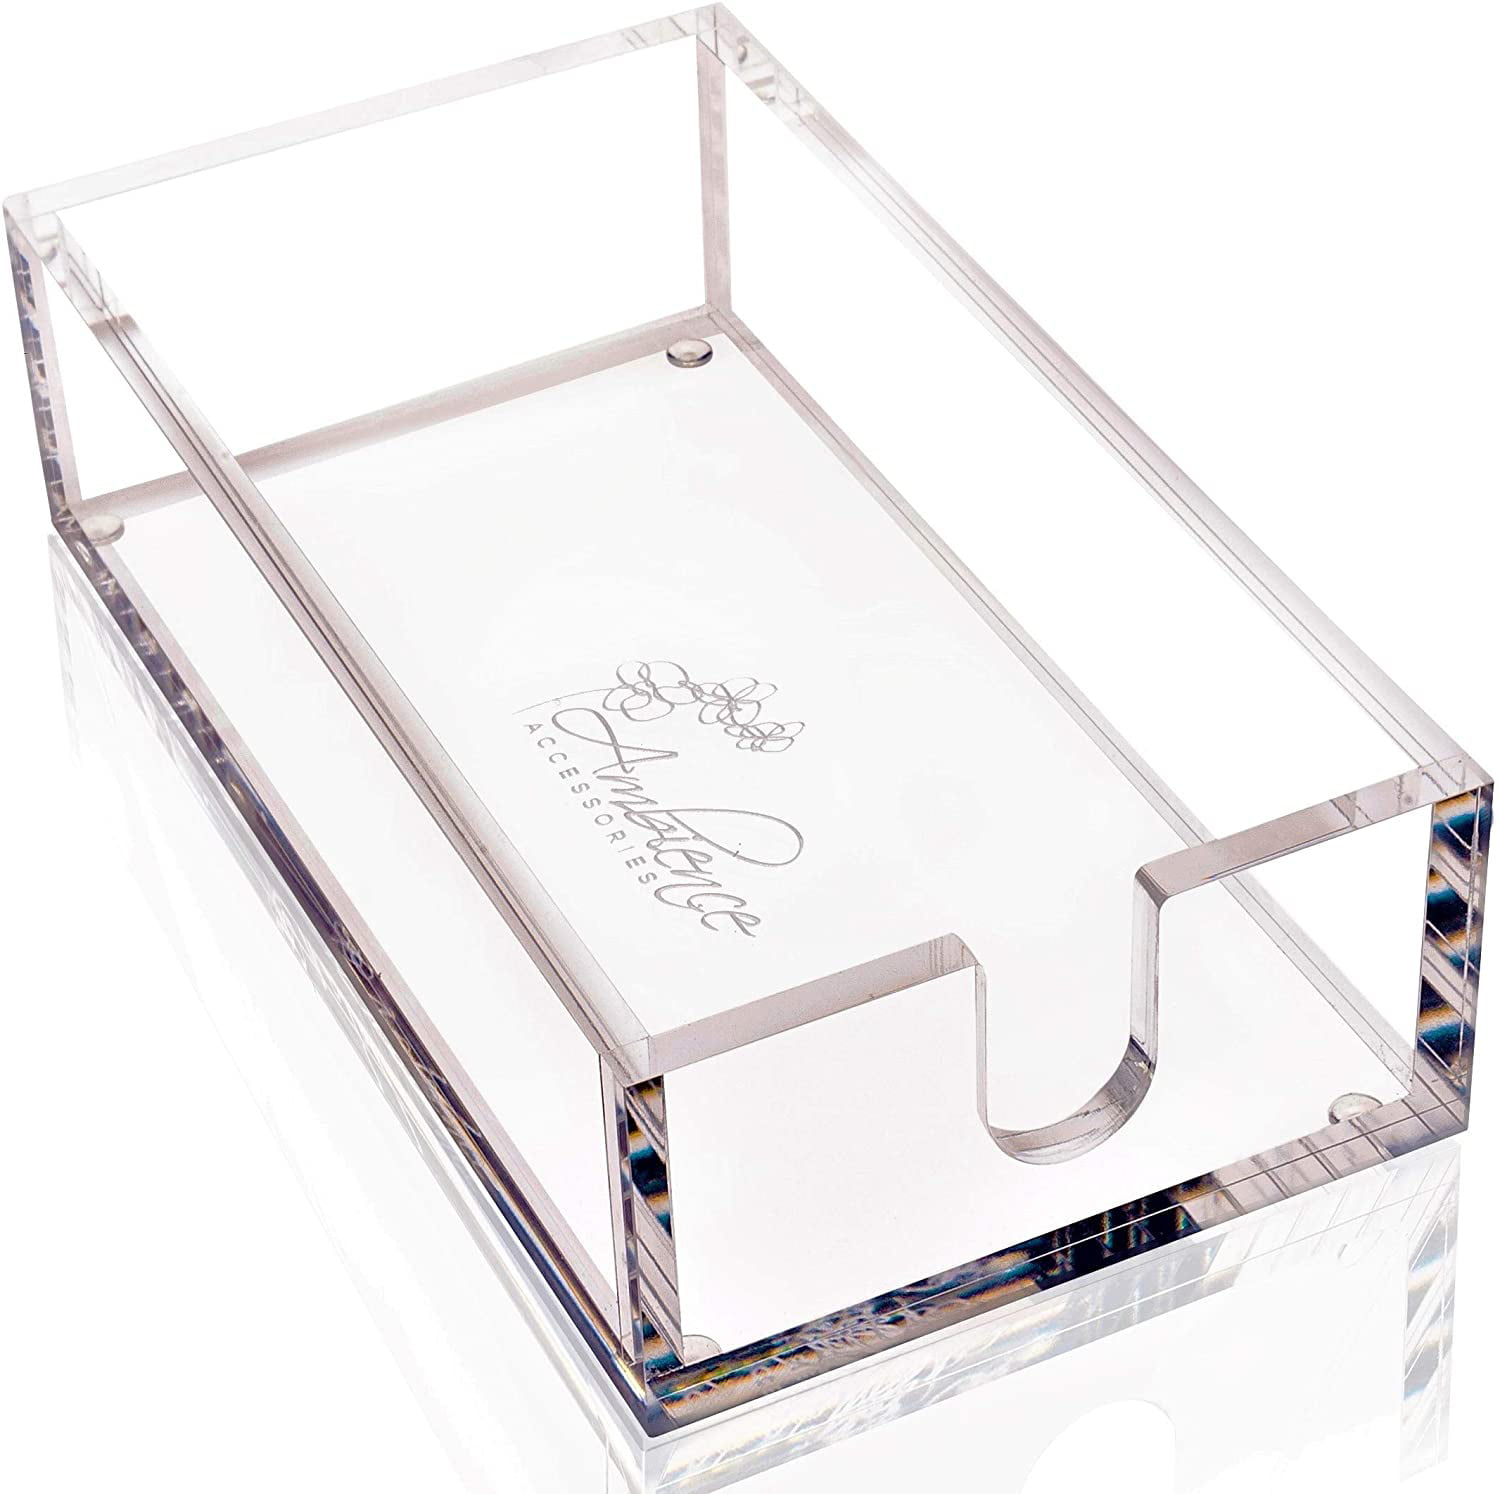 Details about   Beautiful Acrylic Kitchen & Dining Napkin Holder Flower Design Glass Home Decor 